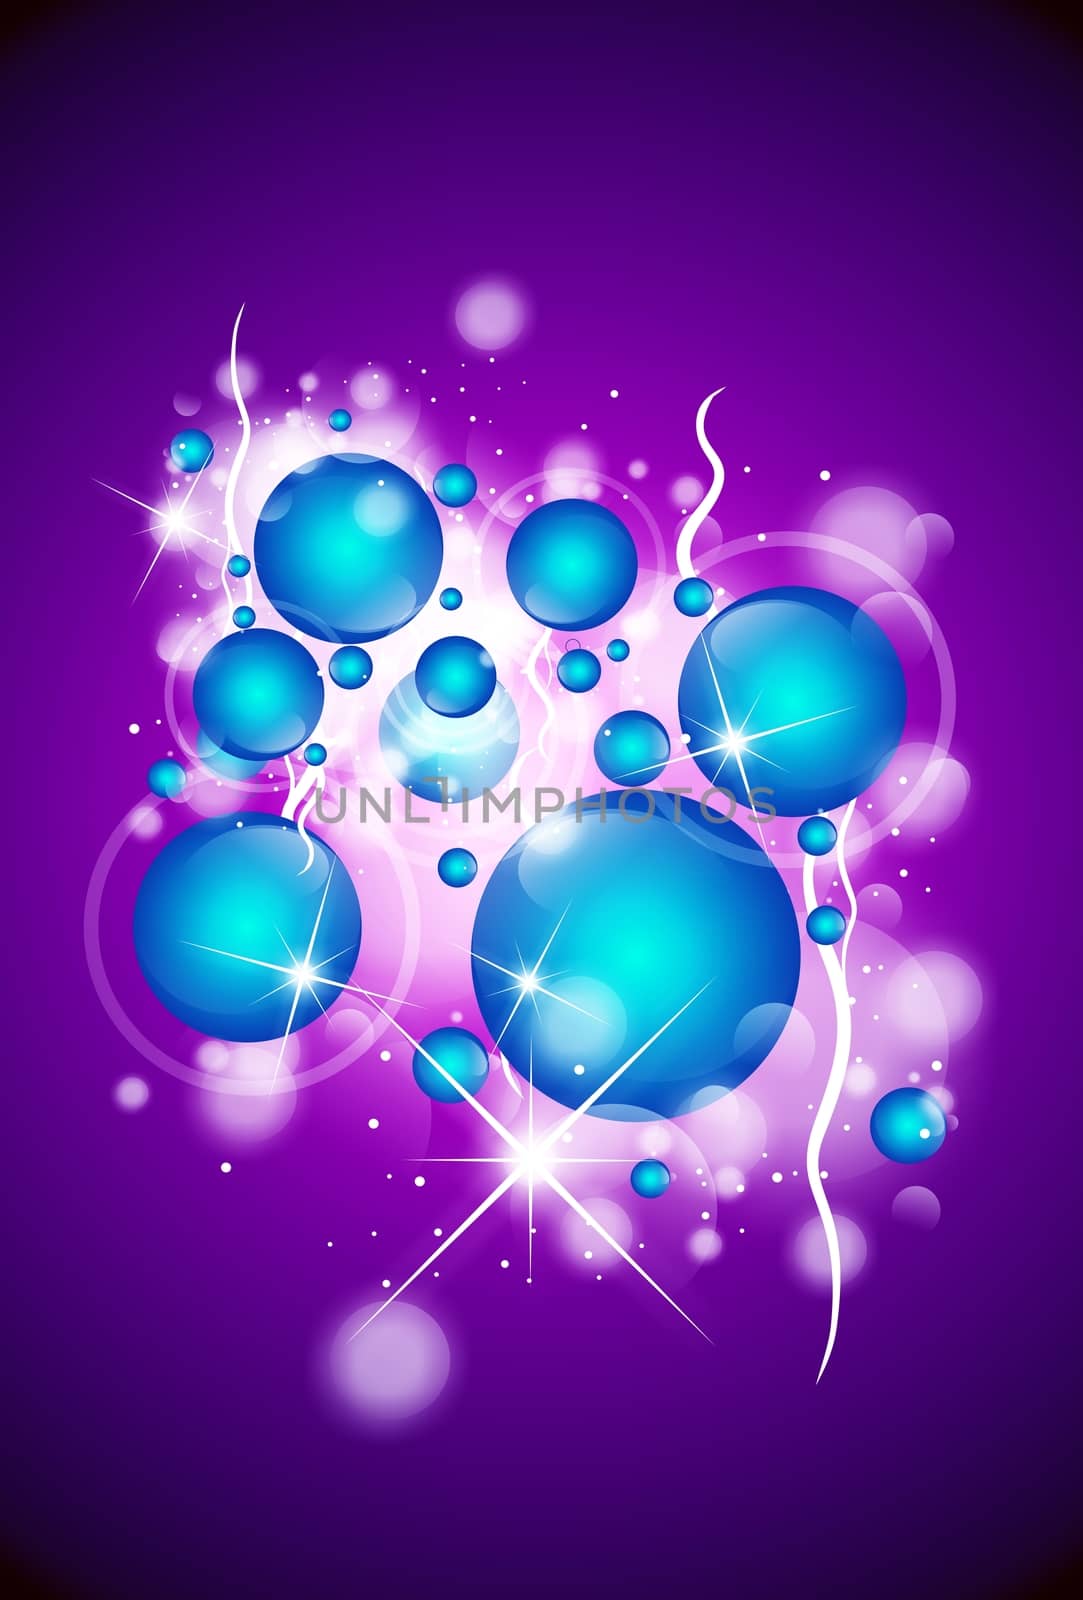 Violet-Blue Bubbles by welcomia